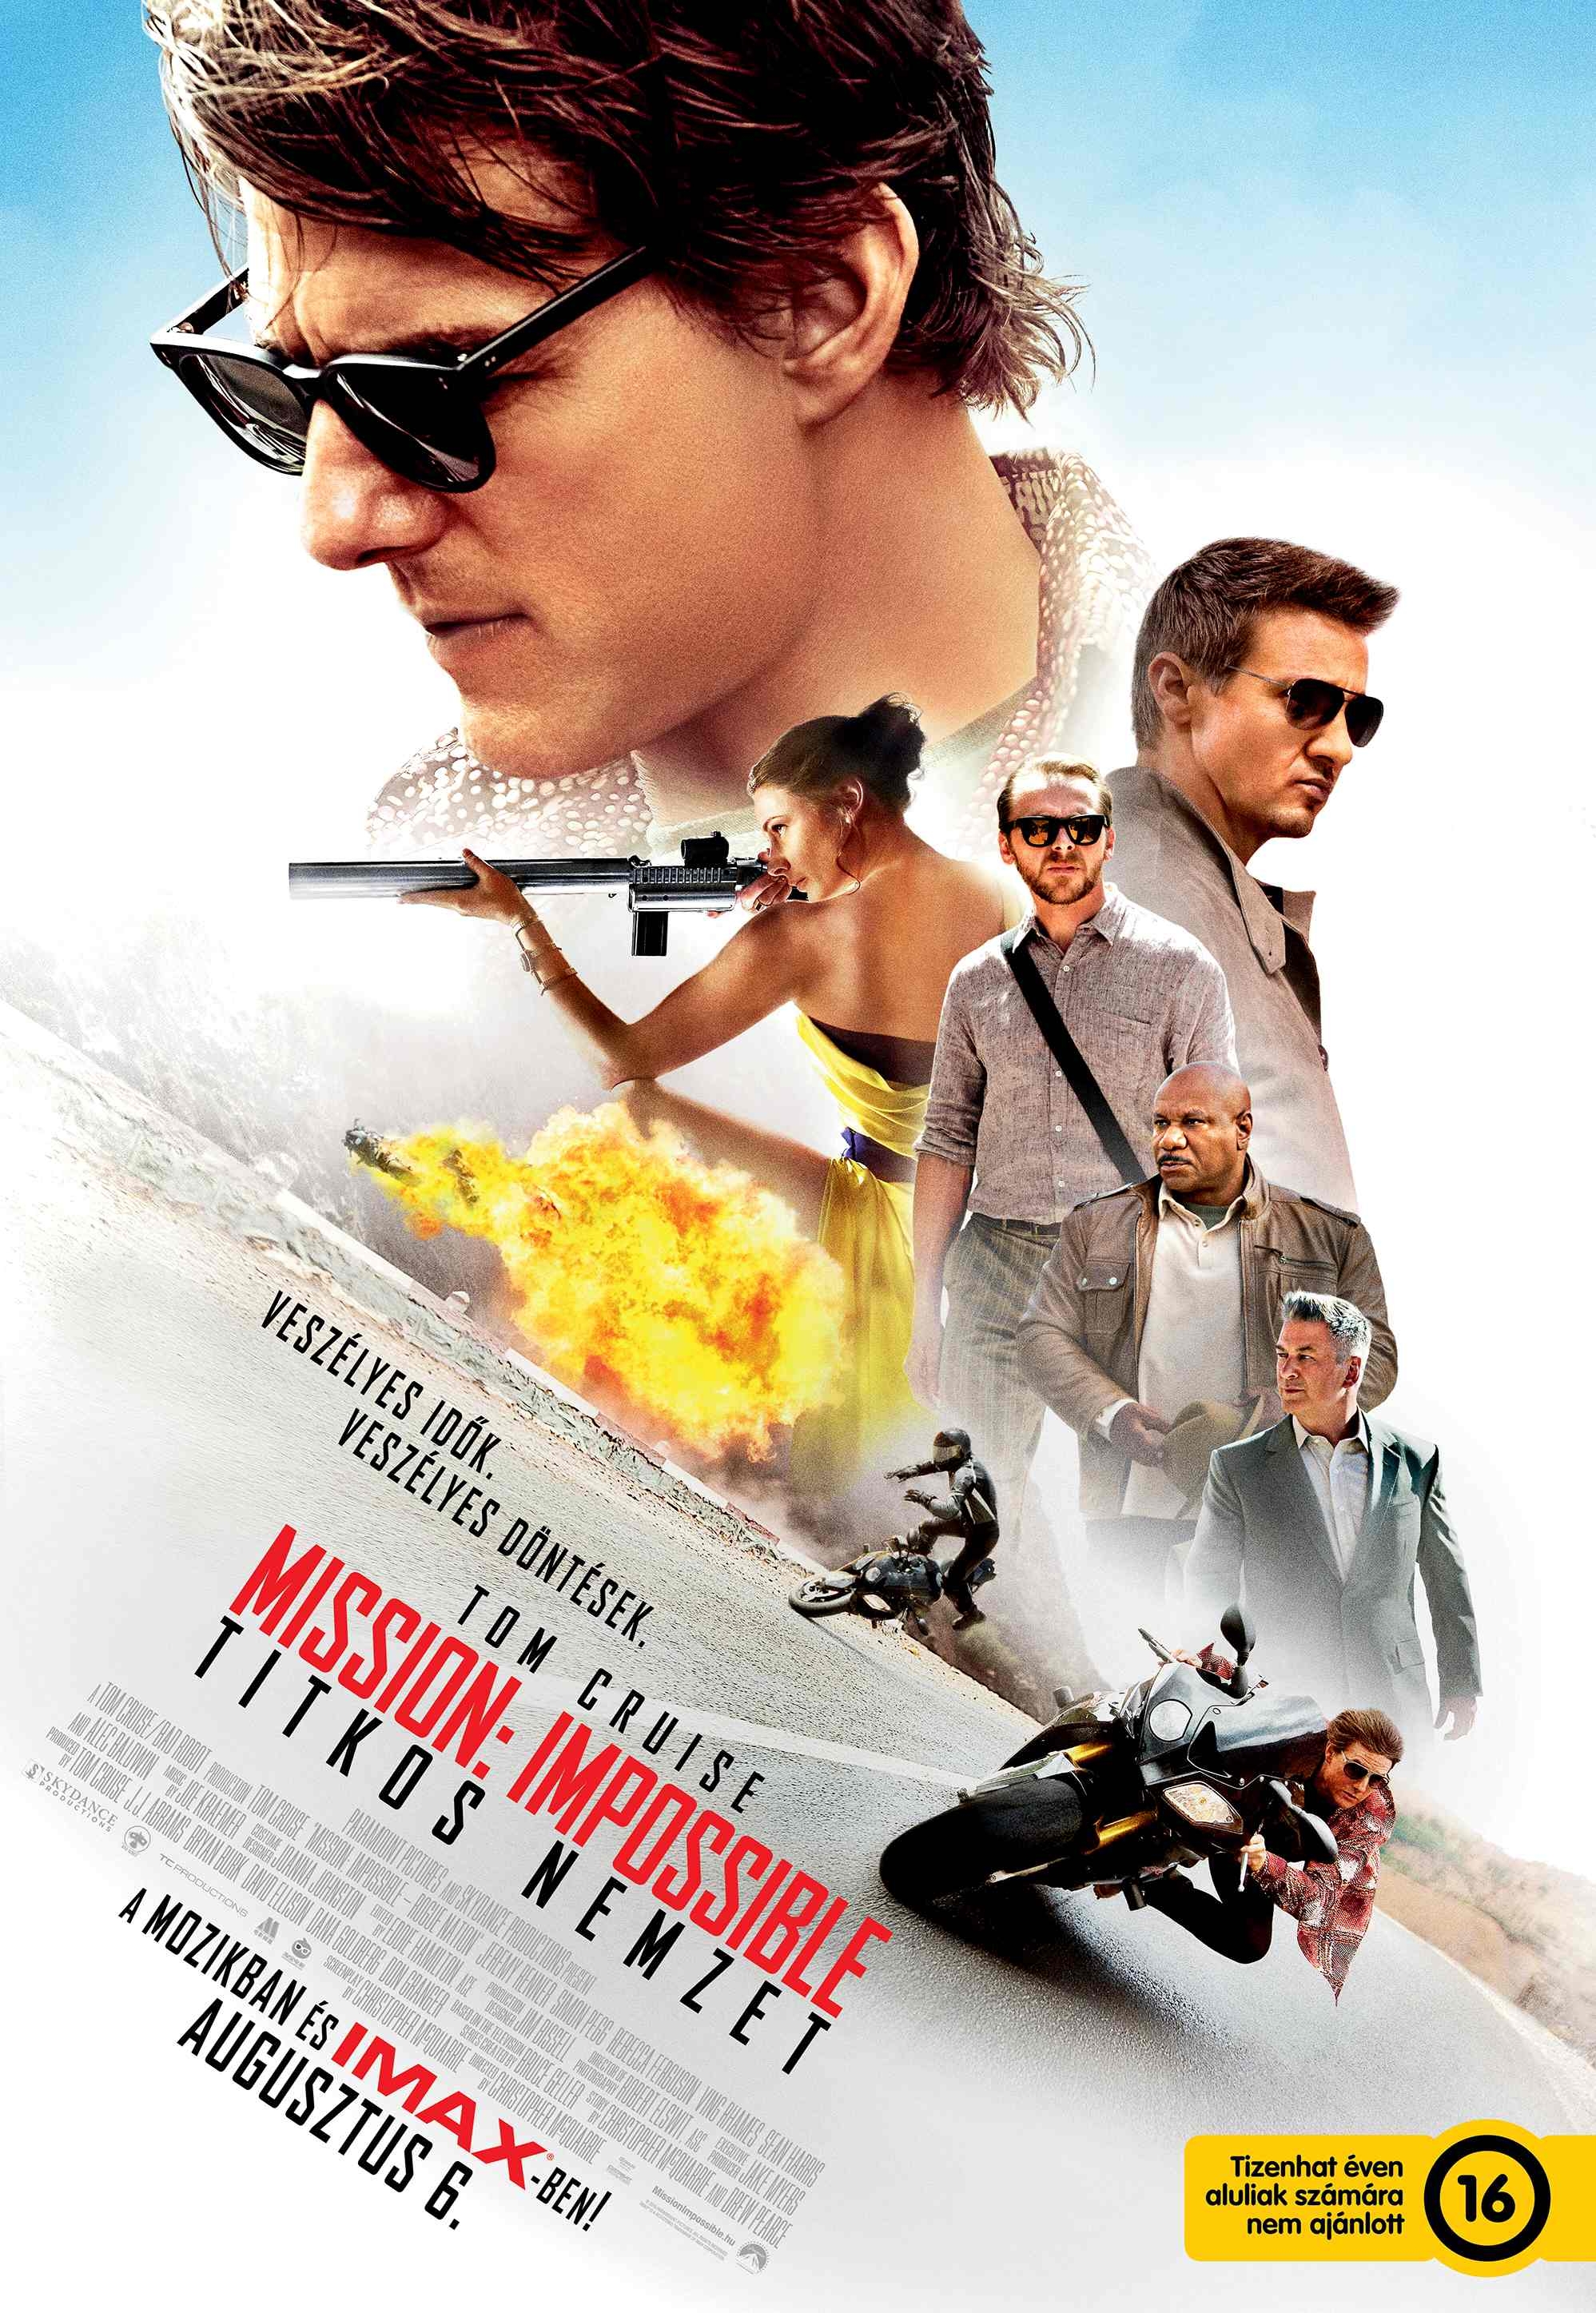 mission impossible cruise